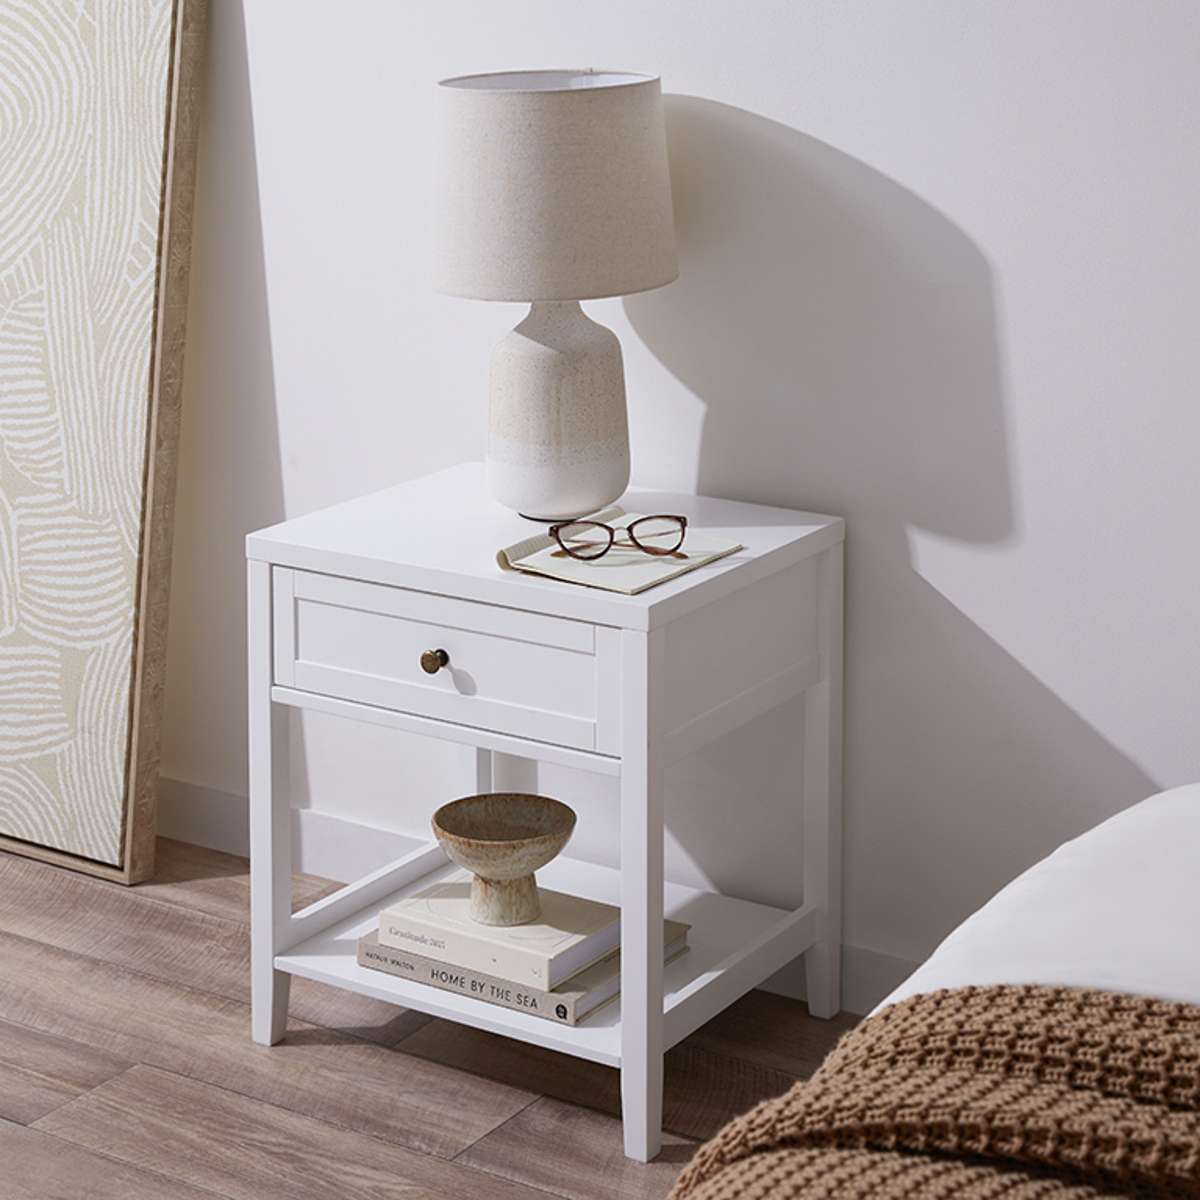 Cove Bedside Table - White